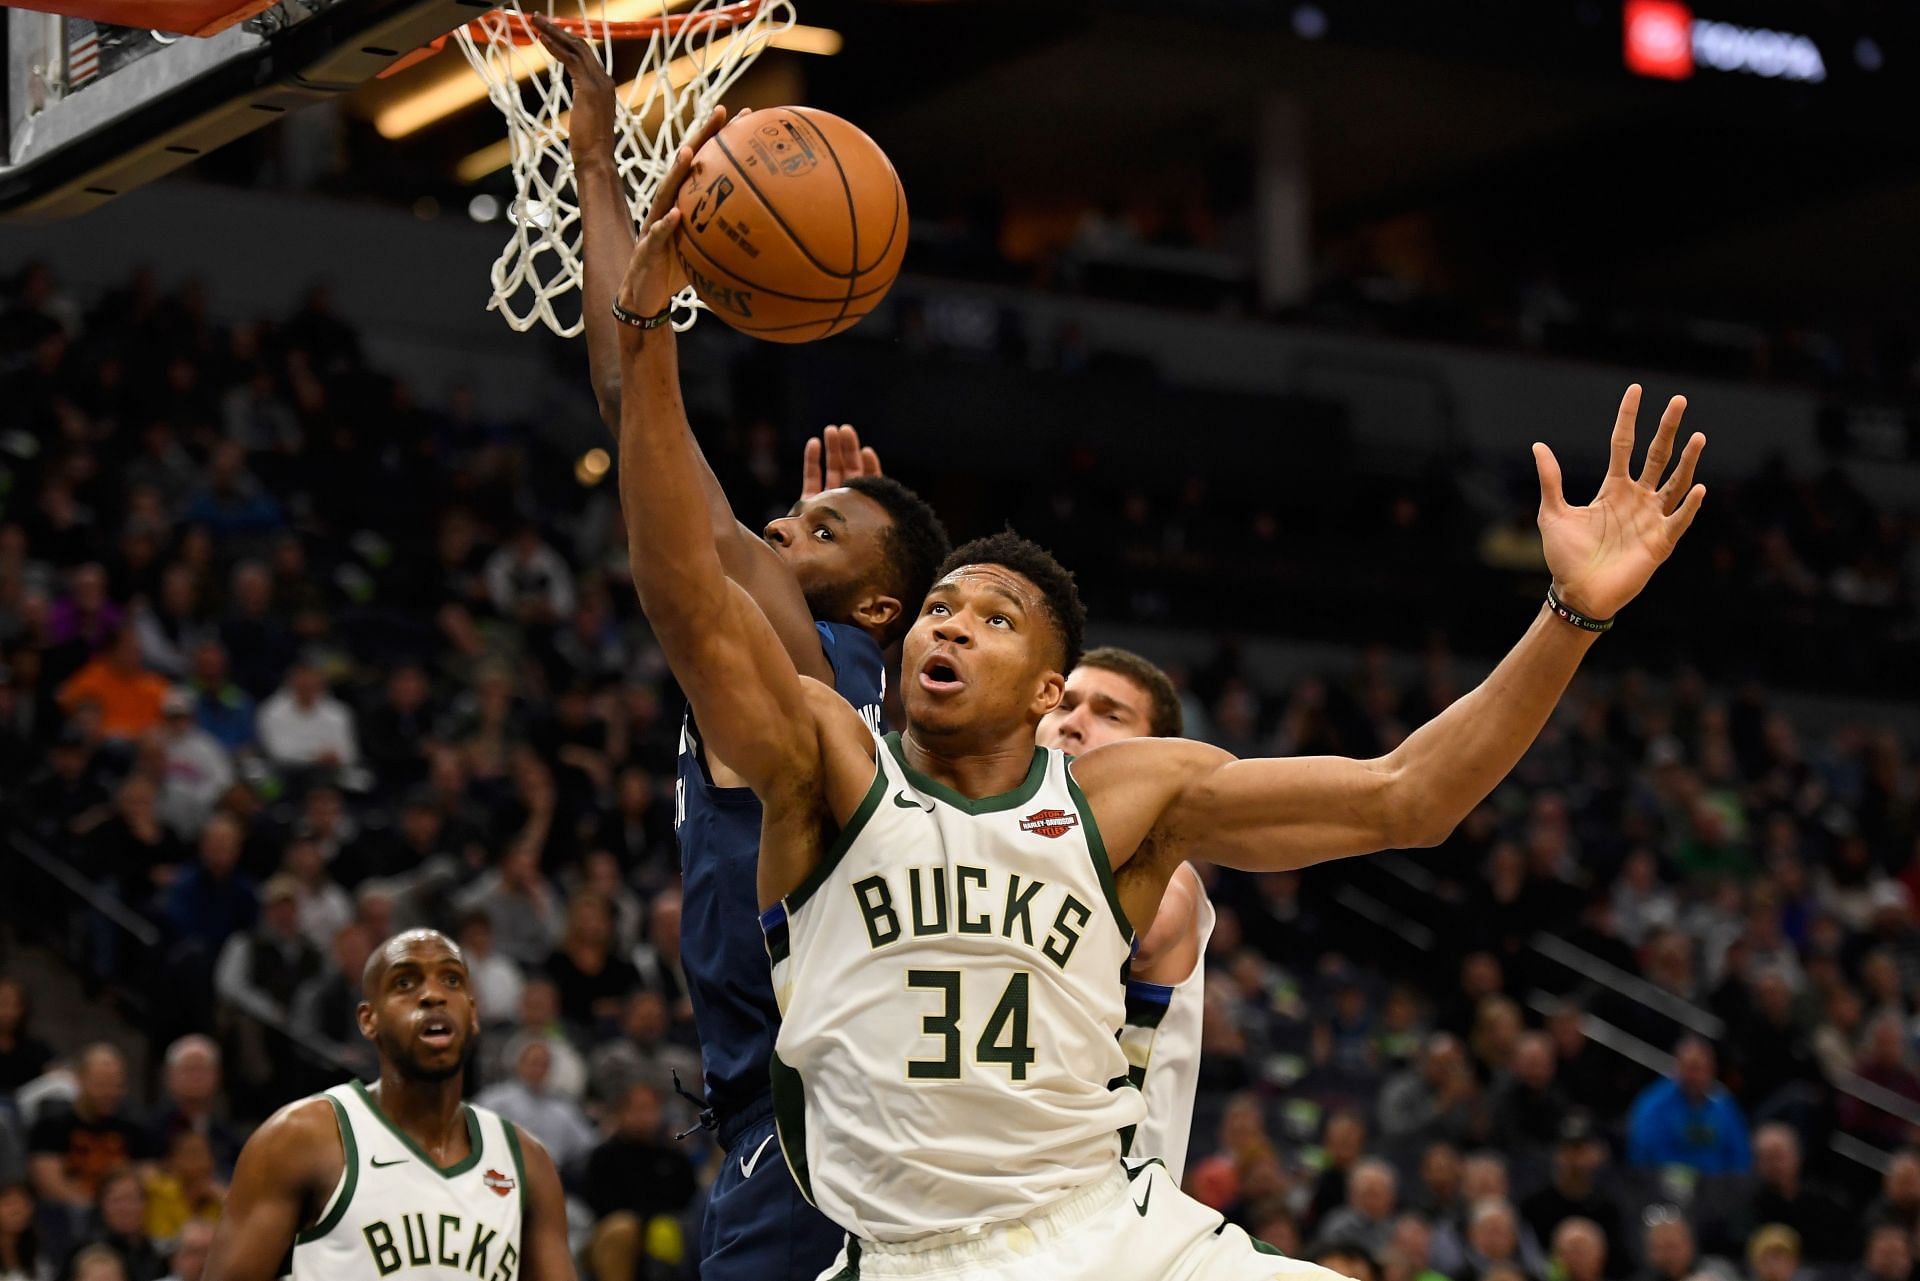 Giannis Antetokounmpo #34 of the Milwaukee Bucks rebounds the ball against Andrew Wiggins #22 of the Minnesota Timberwolves during the first quarter of the game at Target Center on November 4, 2019 in Minneapolis, Minnesota.